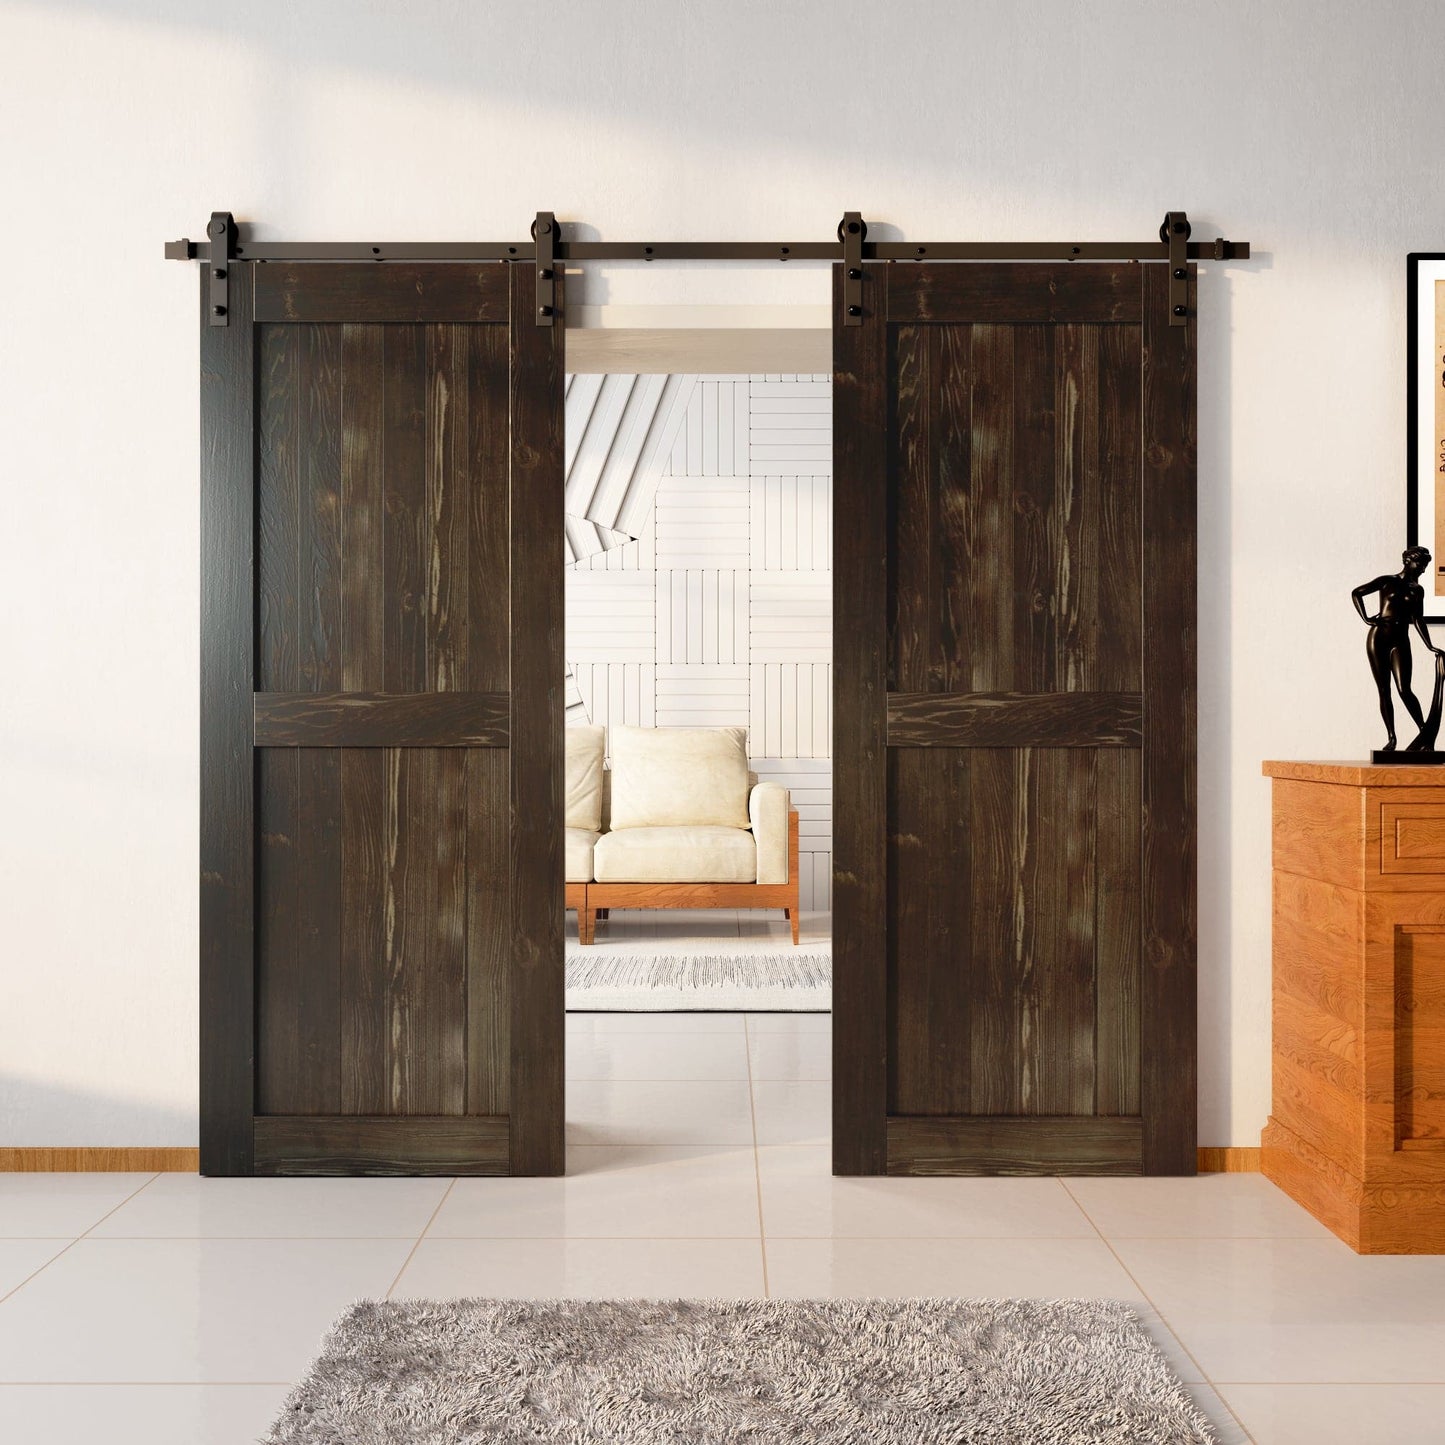 Finished & Unassembled Double Barn Door with Non-Bypass Installation Hardware Kit (H Design)